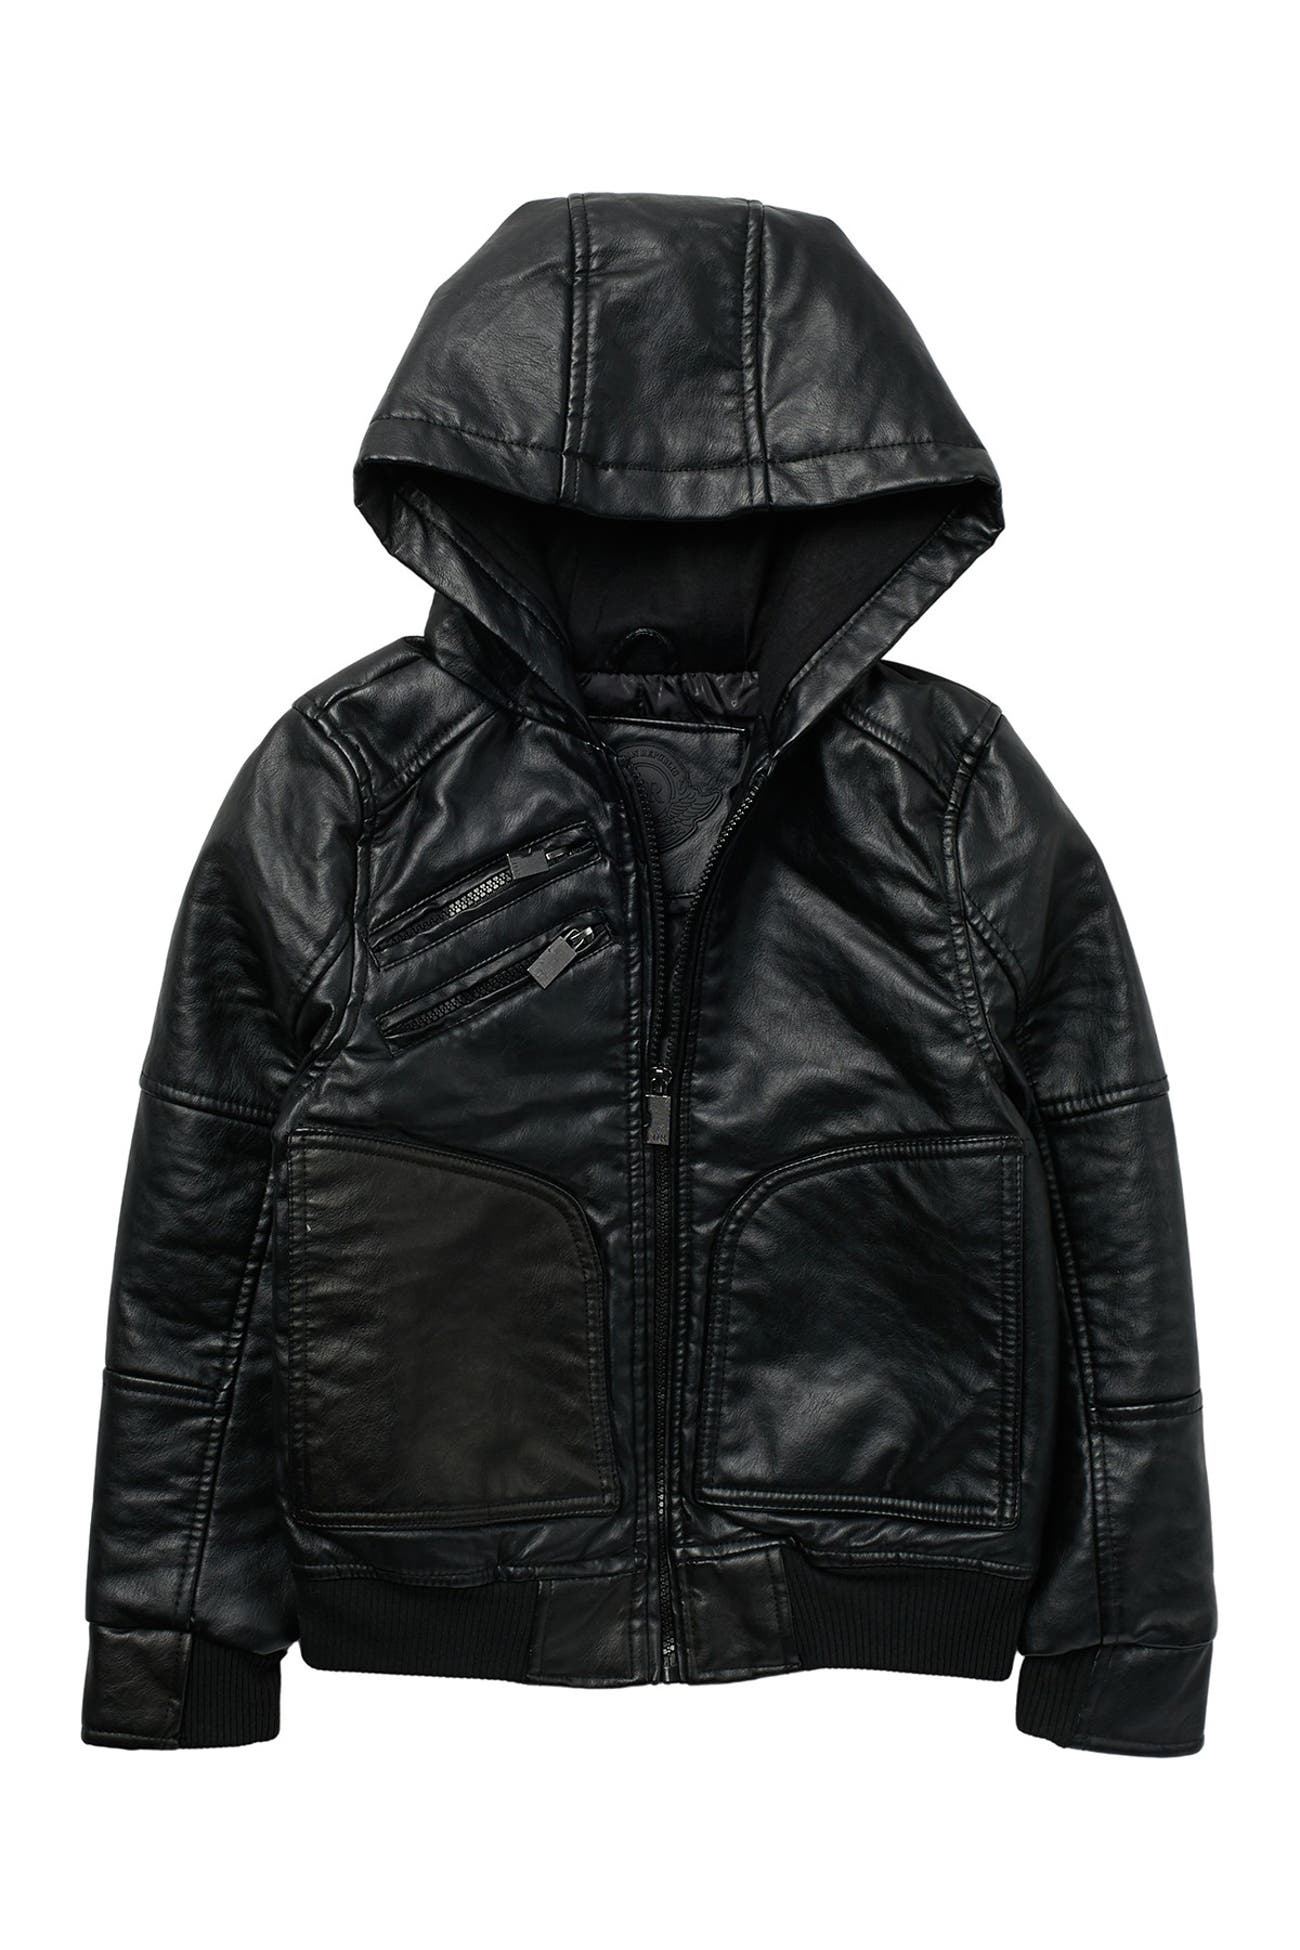 Urban Republic | Faux Leather Hooded Jacket | Nordstrom Rack